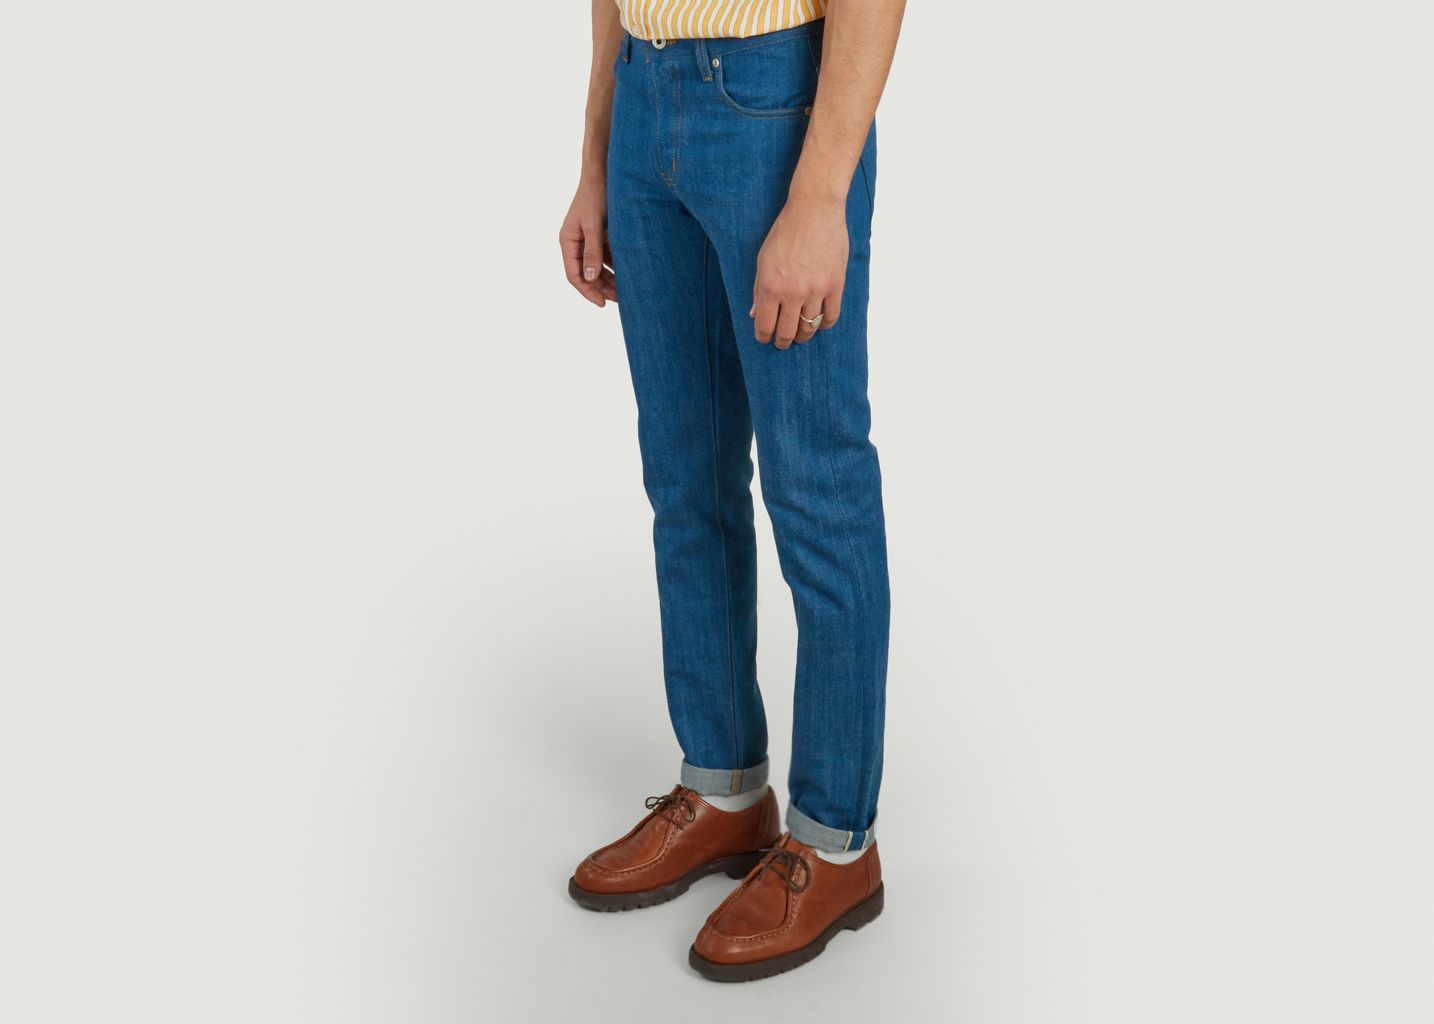 Jean Super Guy Oceans Edge Selvedge - Naked and Famous